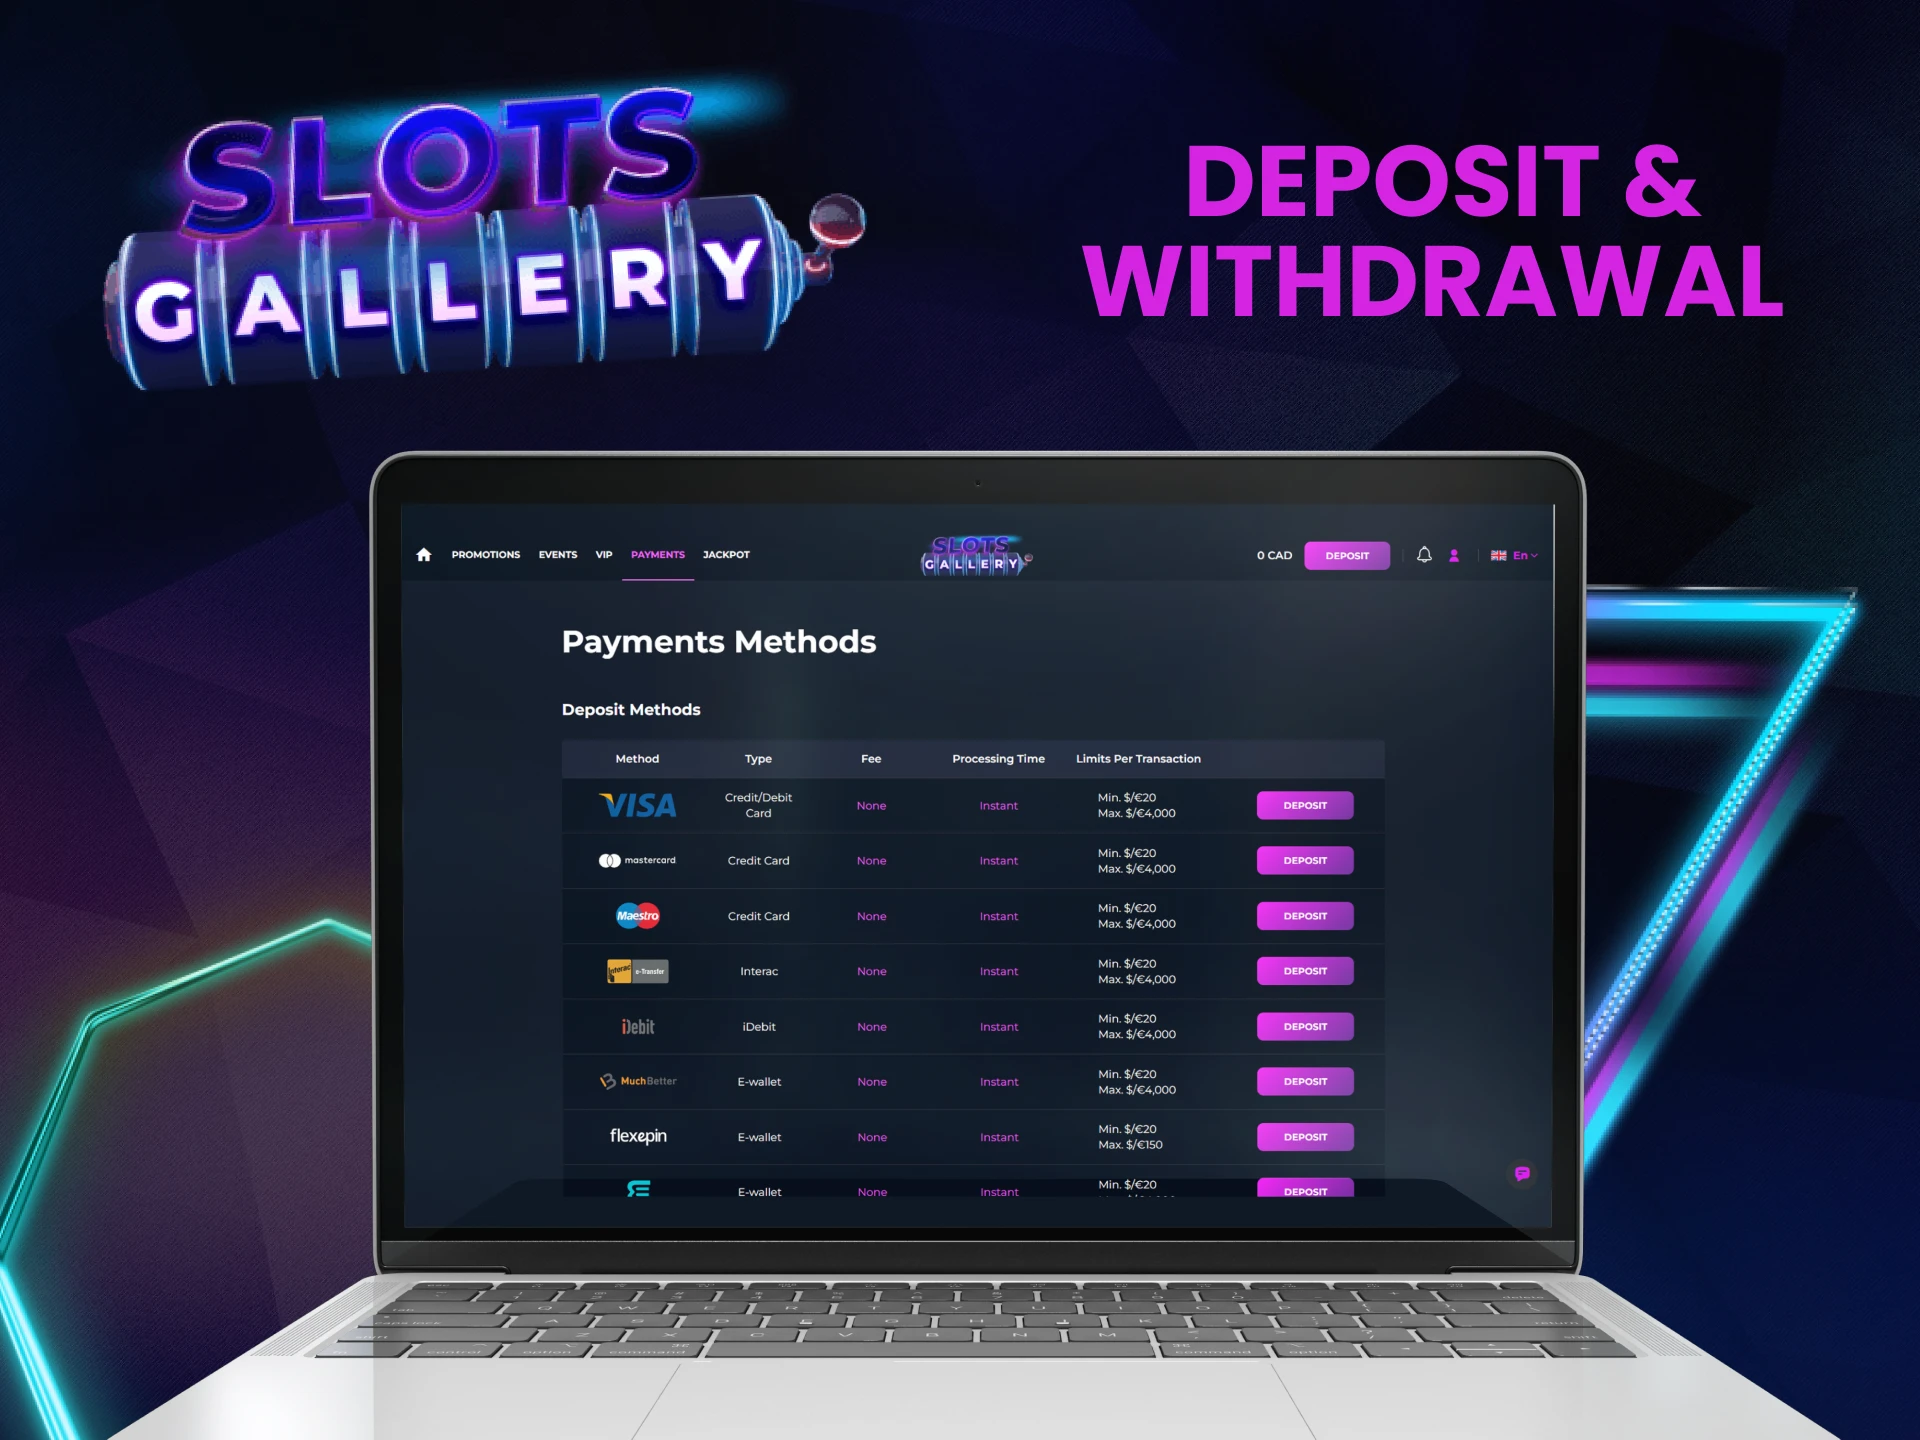 Find out what transaction methods are available on Slots Gallery.